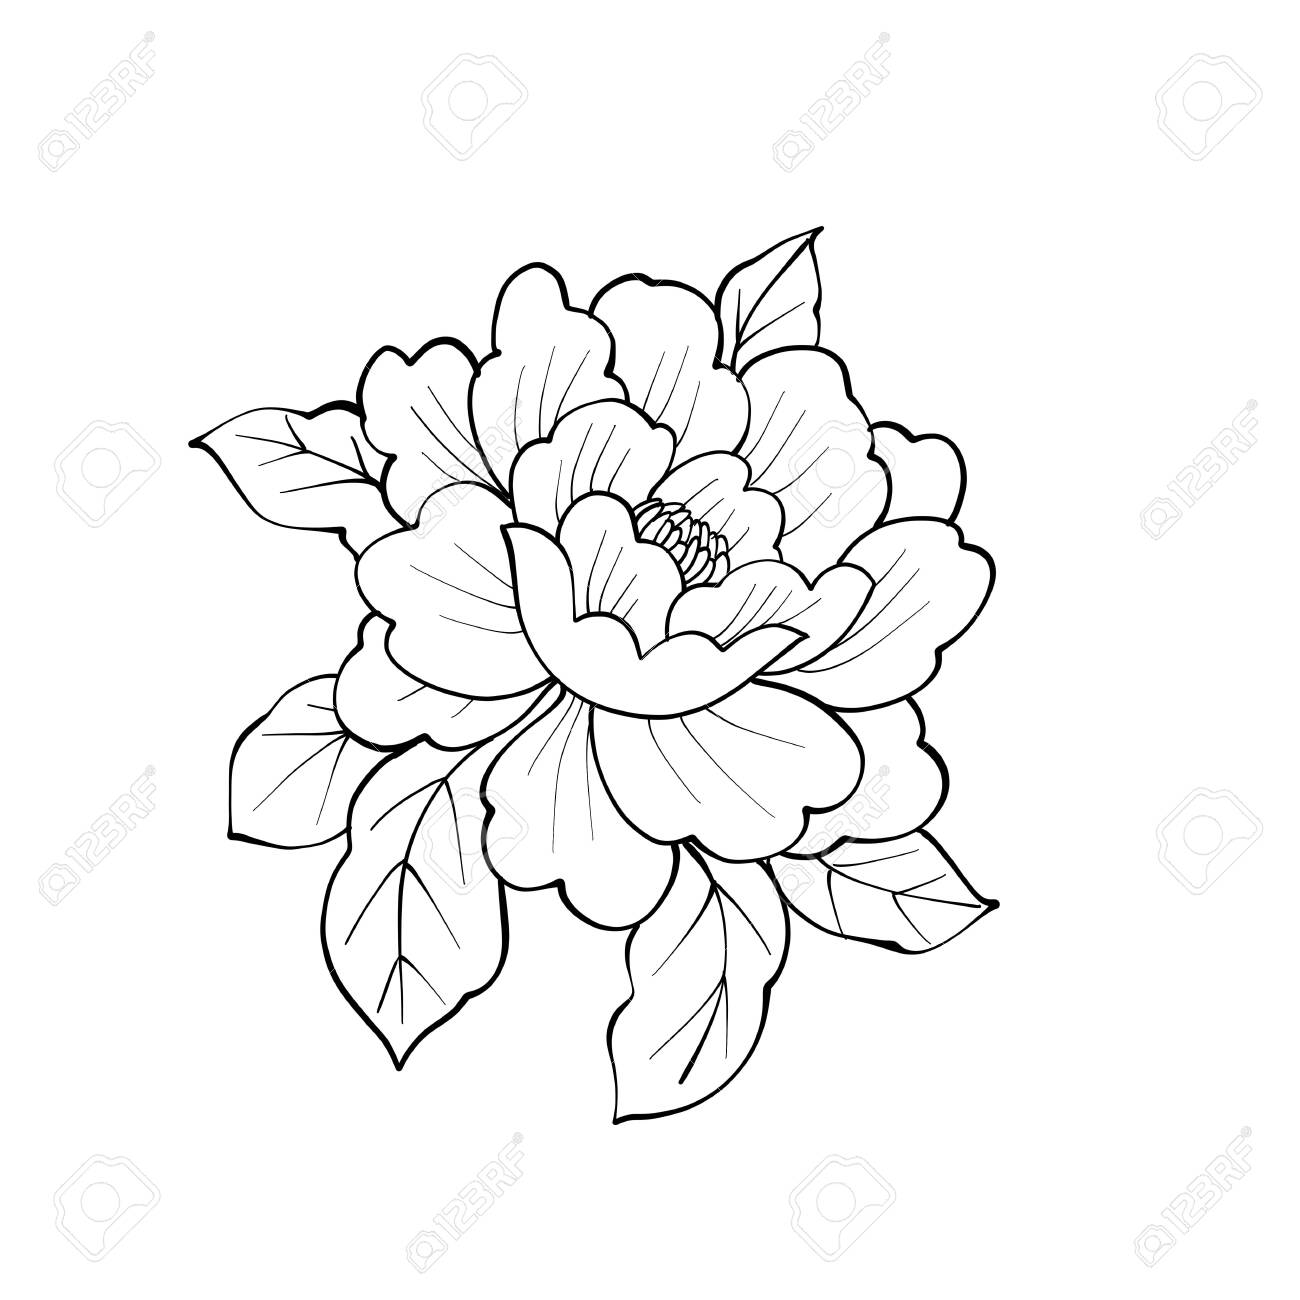 Peony flower with leafs coloring book page stock photo picture and royalty free image image